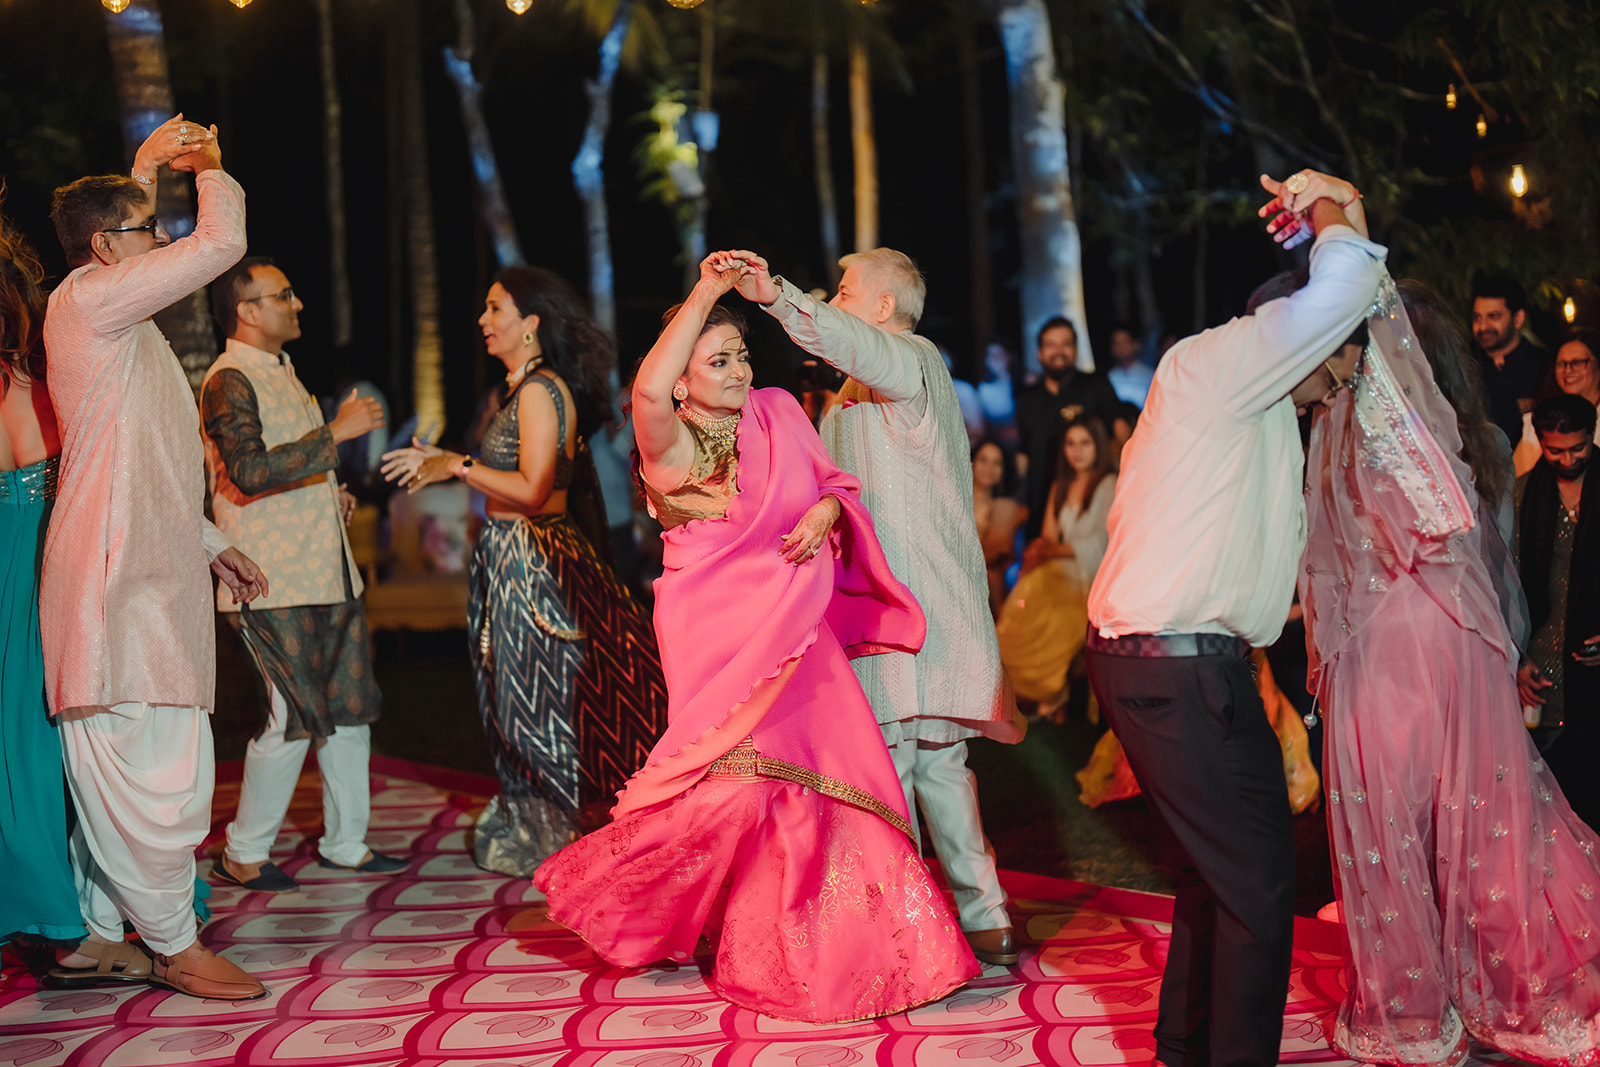 Night of fun: Capturing the enthusiasm as a guest dances away in the lively atmosphere